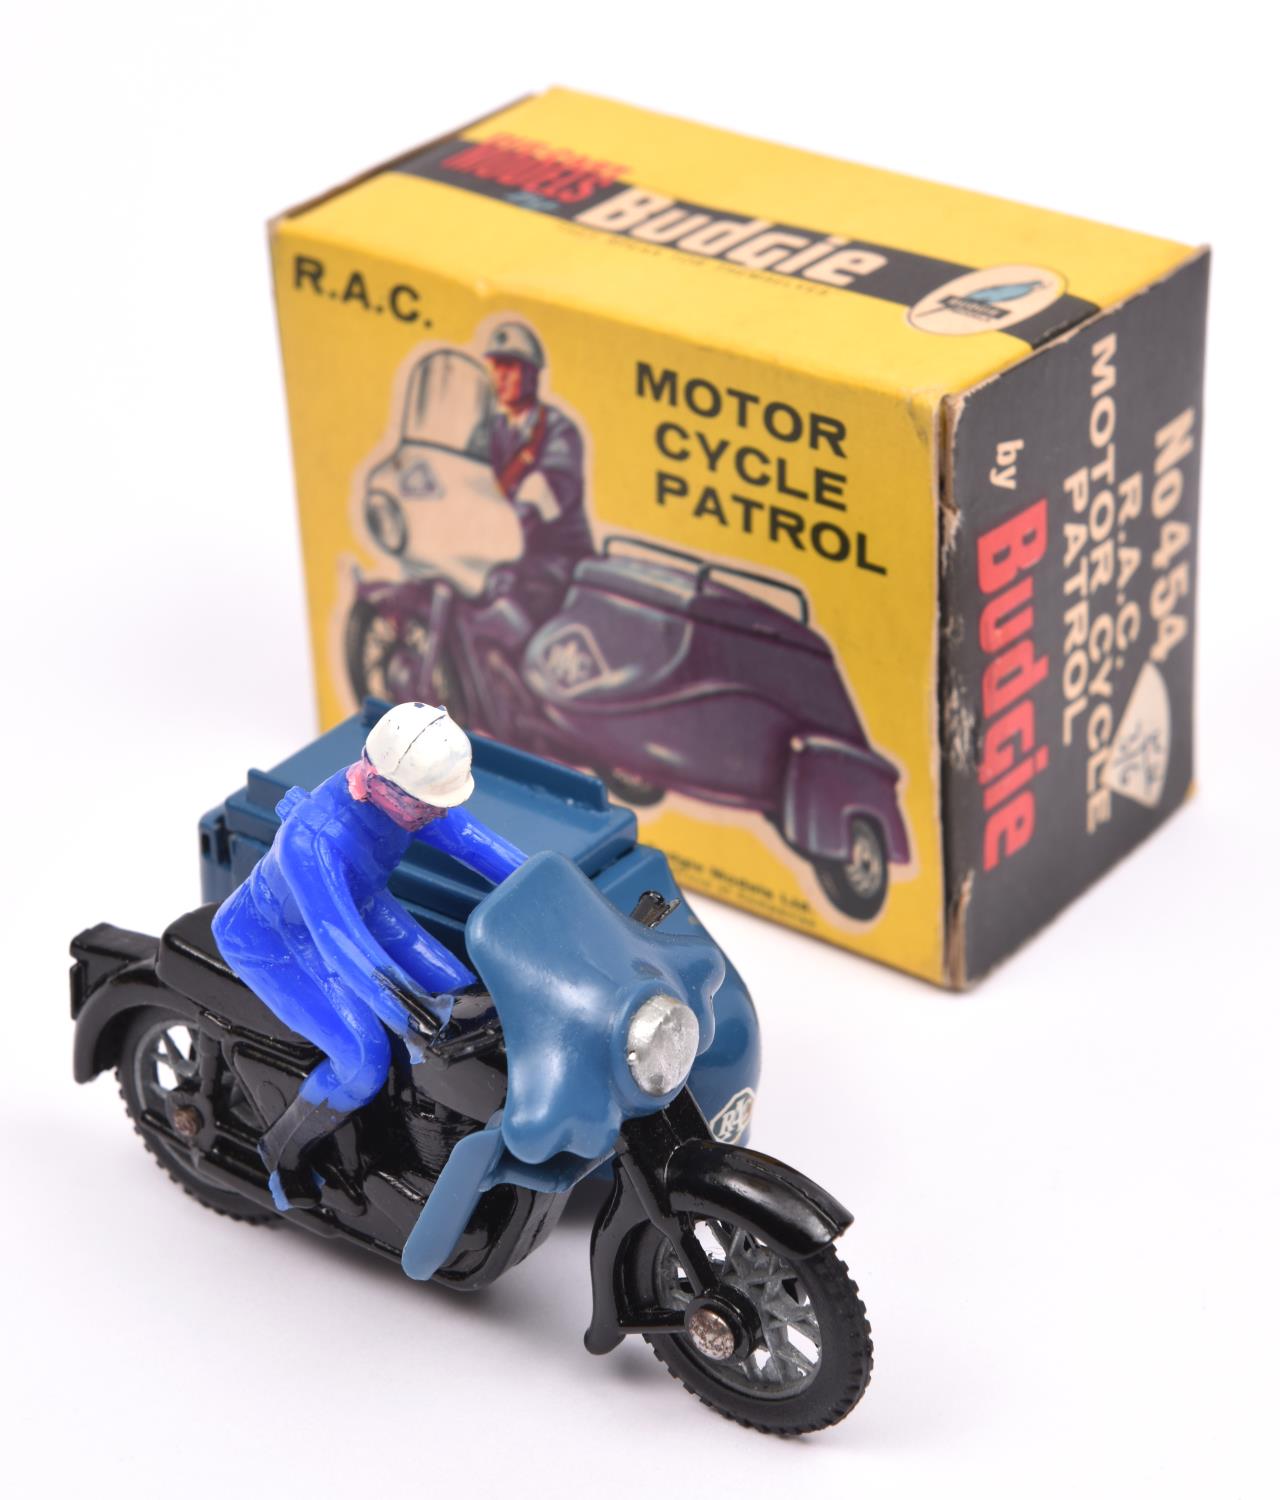 Budgie Toys R.A.C. Motorcycle Patrol (454). In black and dark blue livery, spoked metal wheels - Image 2 of 2